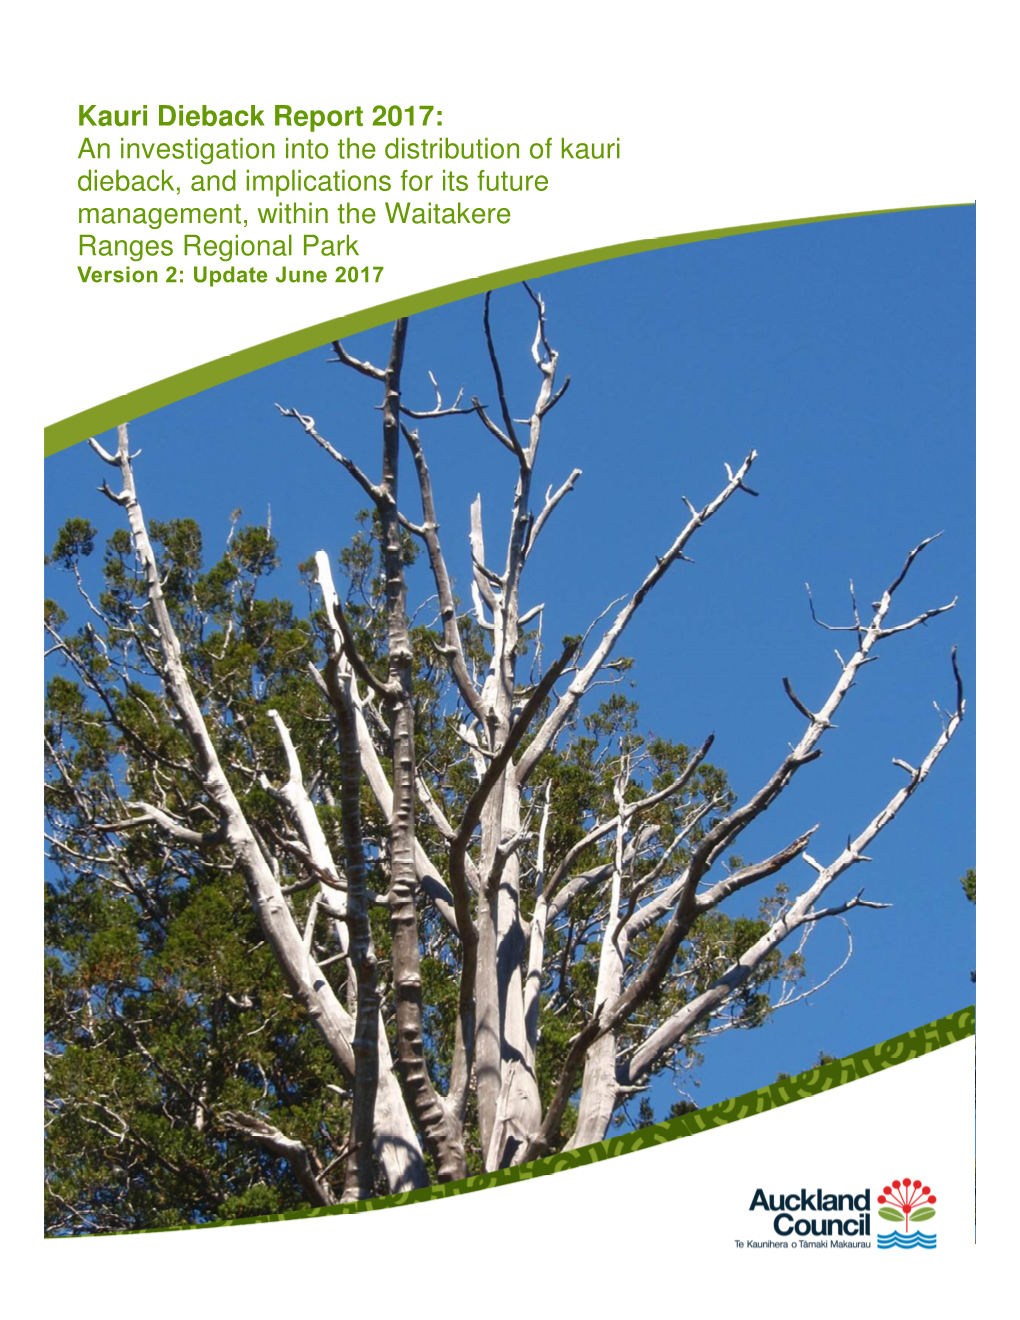 Kauri Dieback Report 2017: an Investigation Into the Distribution of Kauri Dieback, and Implications for Its Future Management